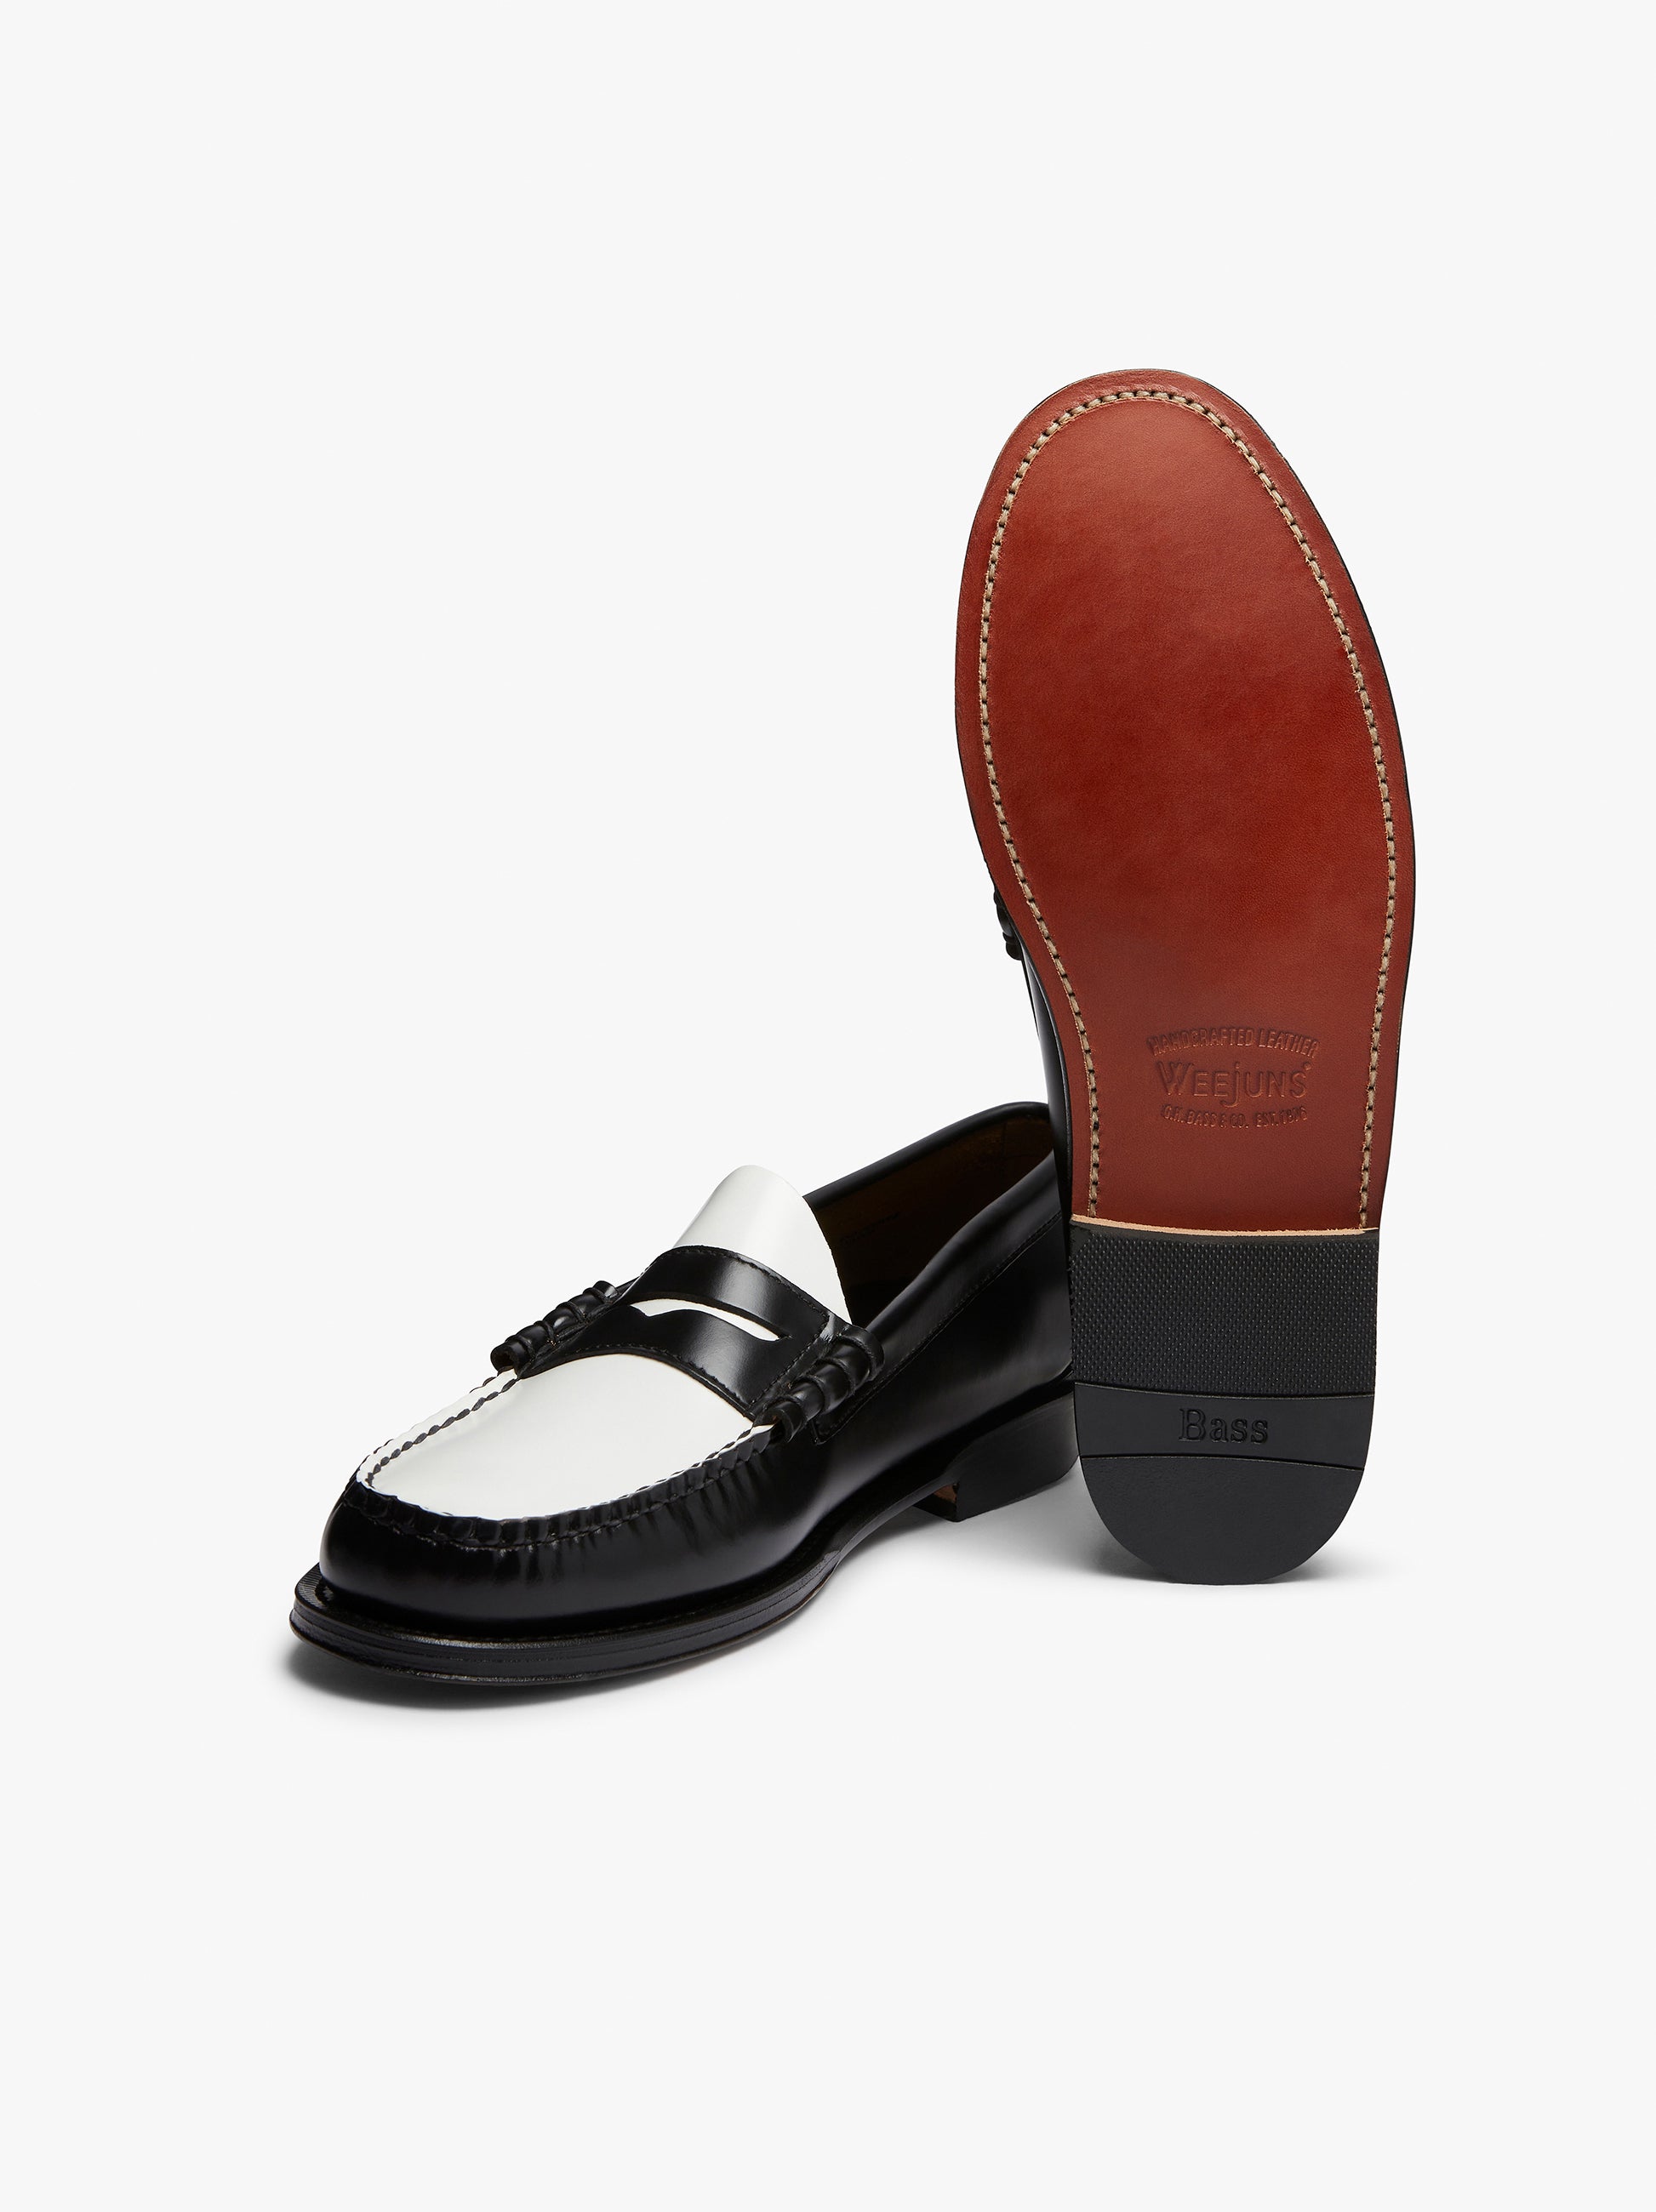 Black And White Mens Penny Loafers | Black And White Loafers